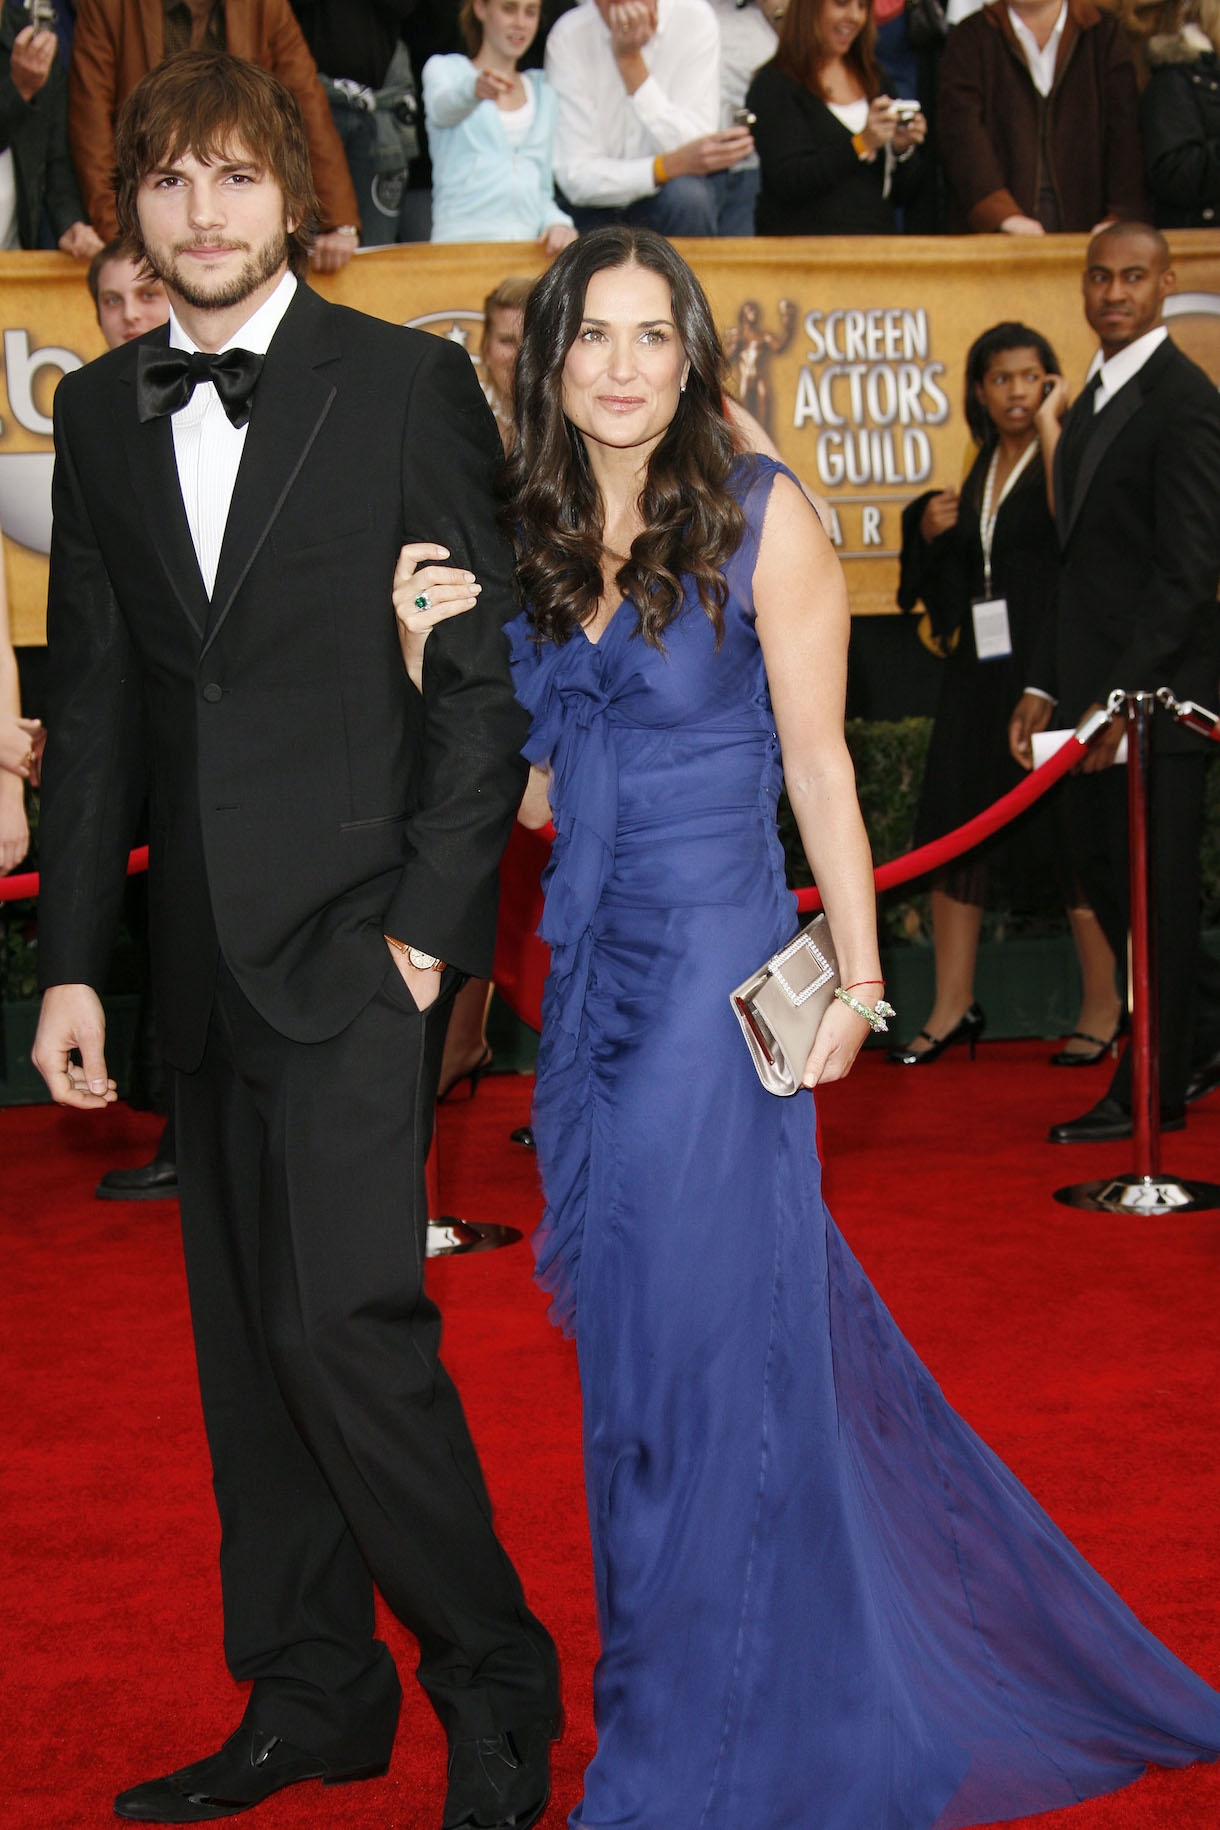 Demi Moore and Ashton Kutcher arrive at he 13th annual Screen Actors Guild Awards show